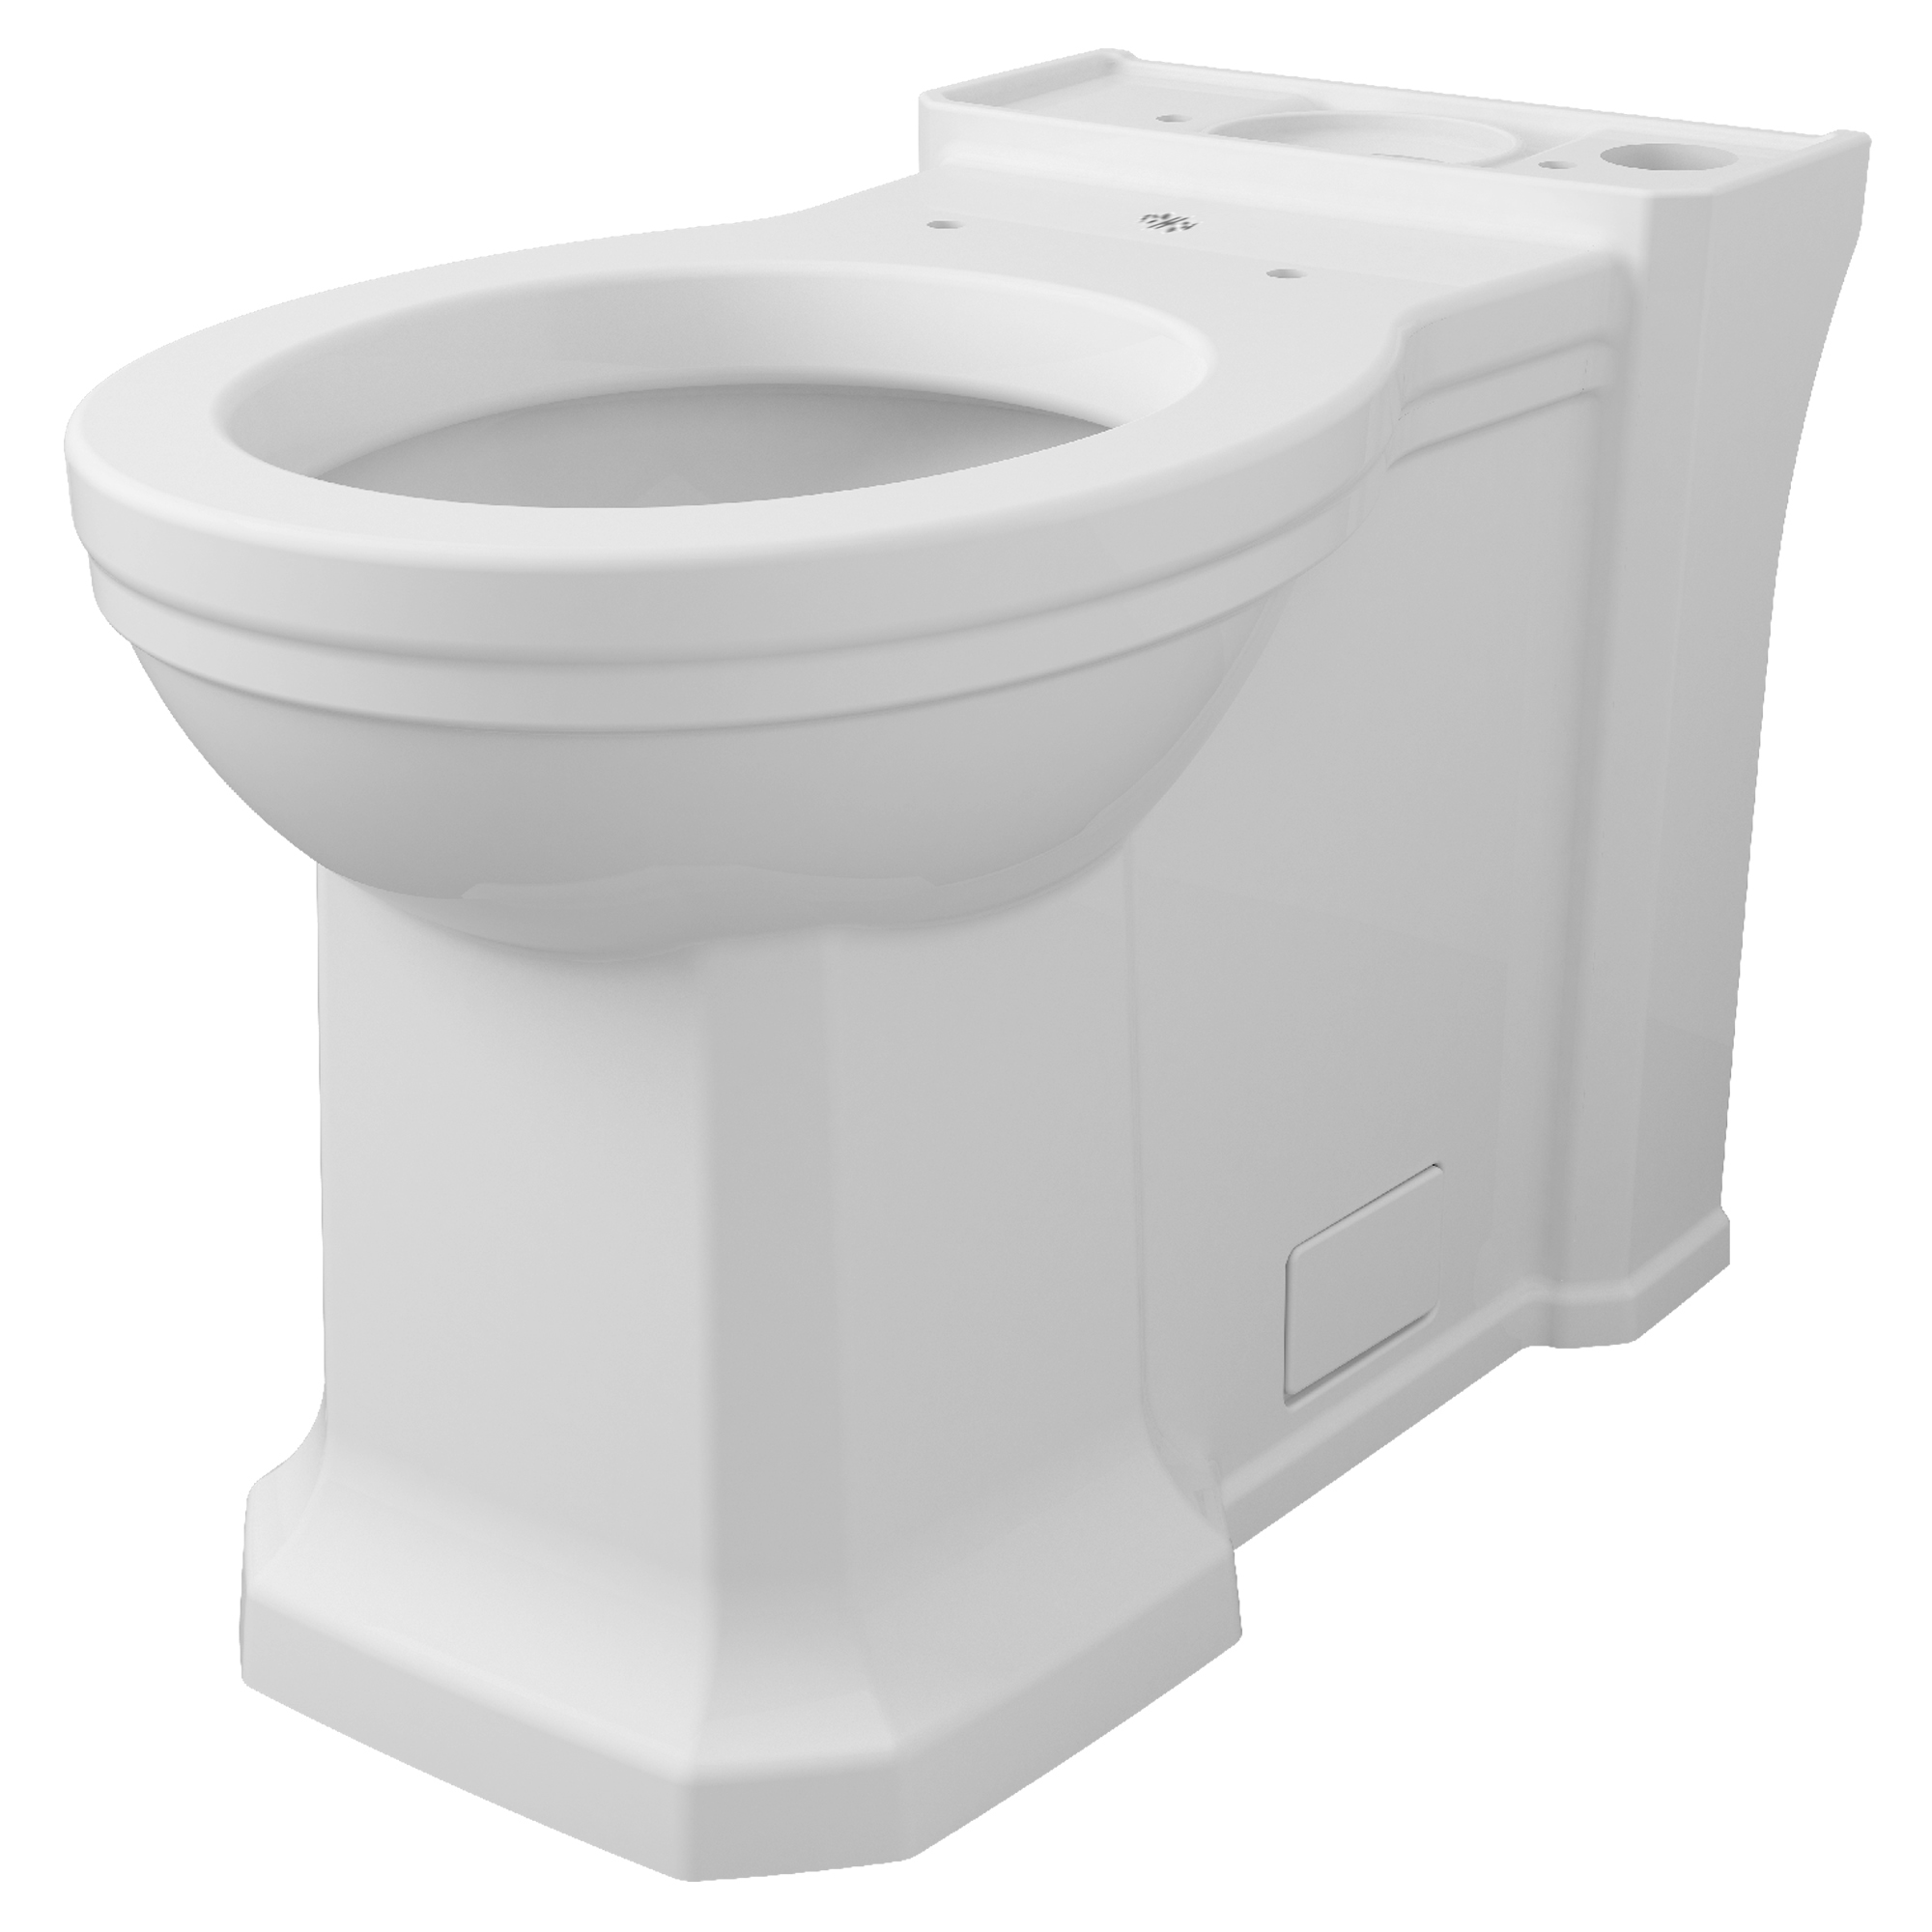 Fitzgerald Chair Height Elongated Toilet Bowl with Seat